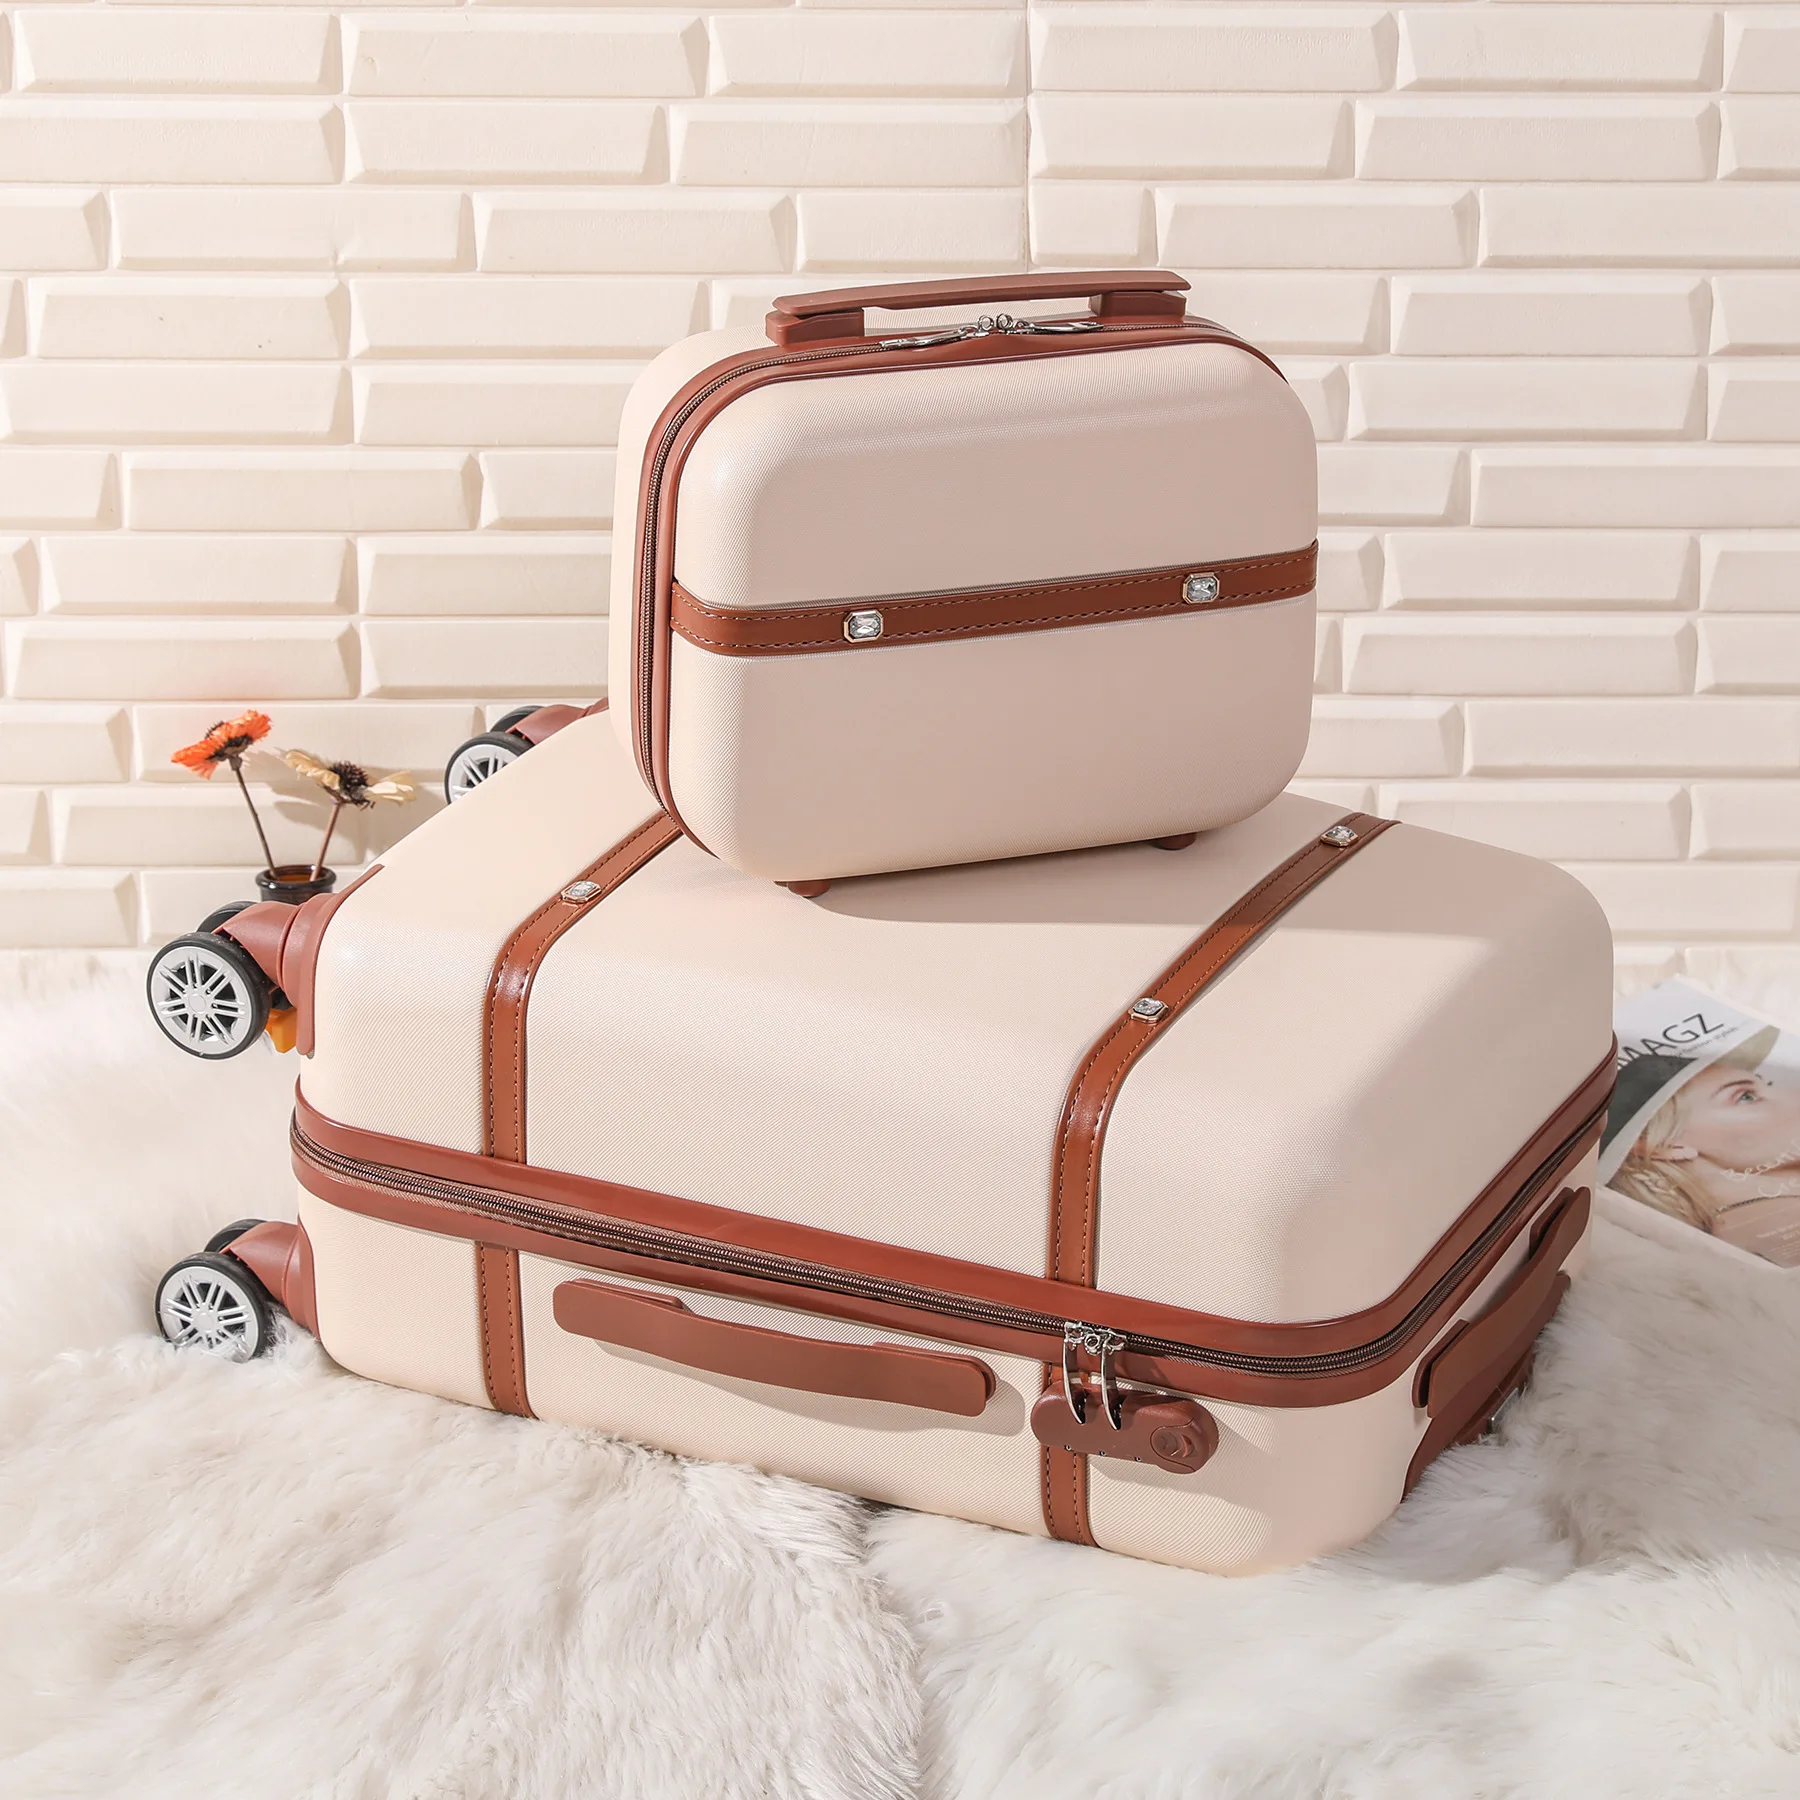 Vintage Luggage bag Travel storage Makeup suitcase 26 inch Designer  suitcases 2 piece luggage set Carry on luggage with wheels - AliExpress